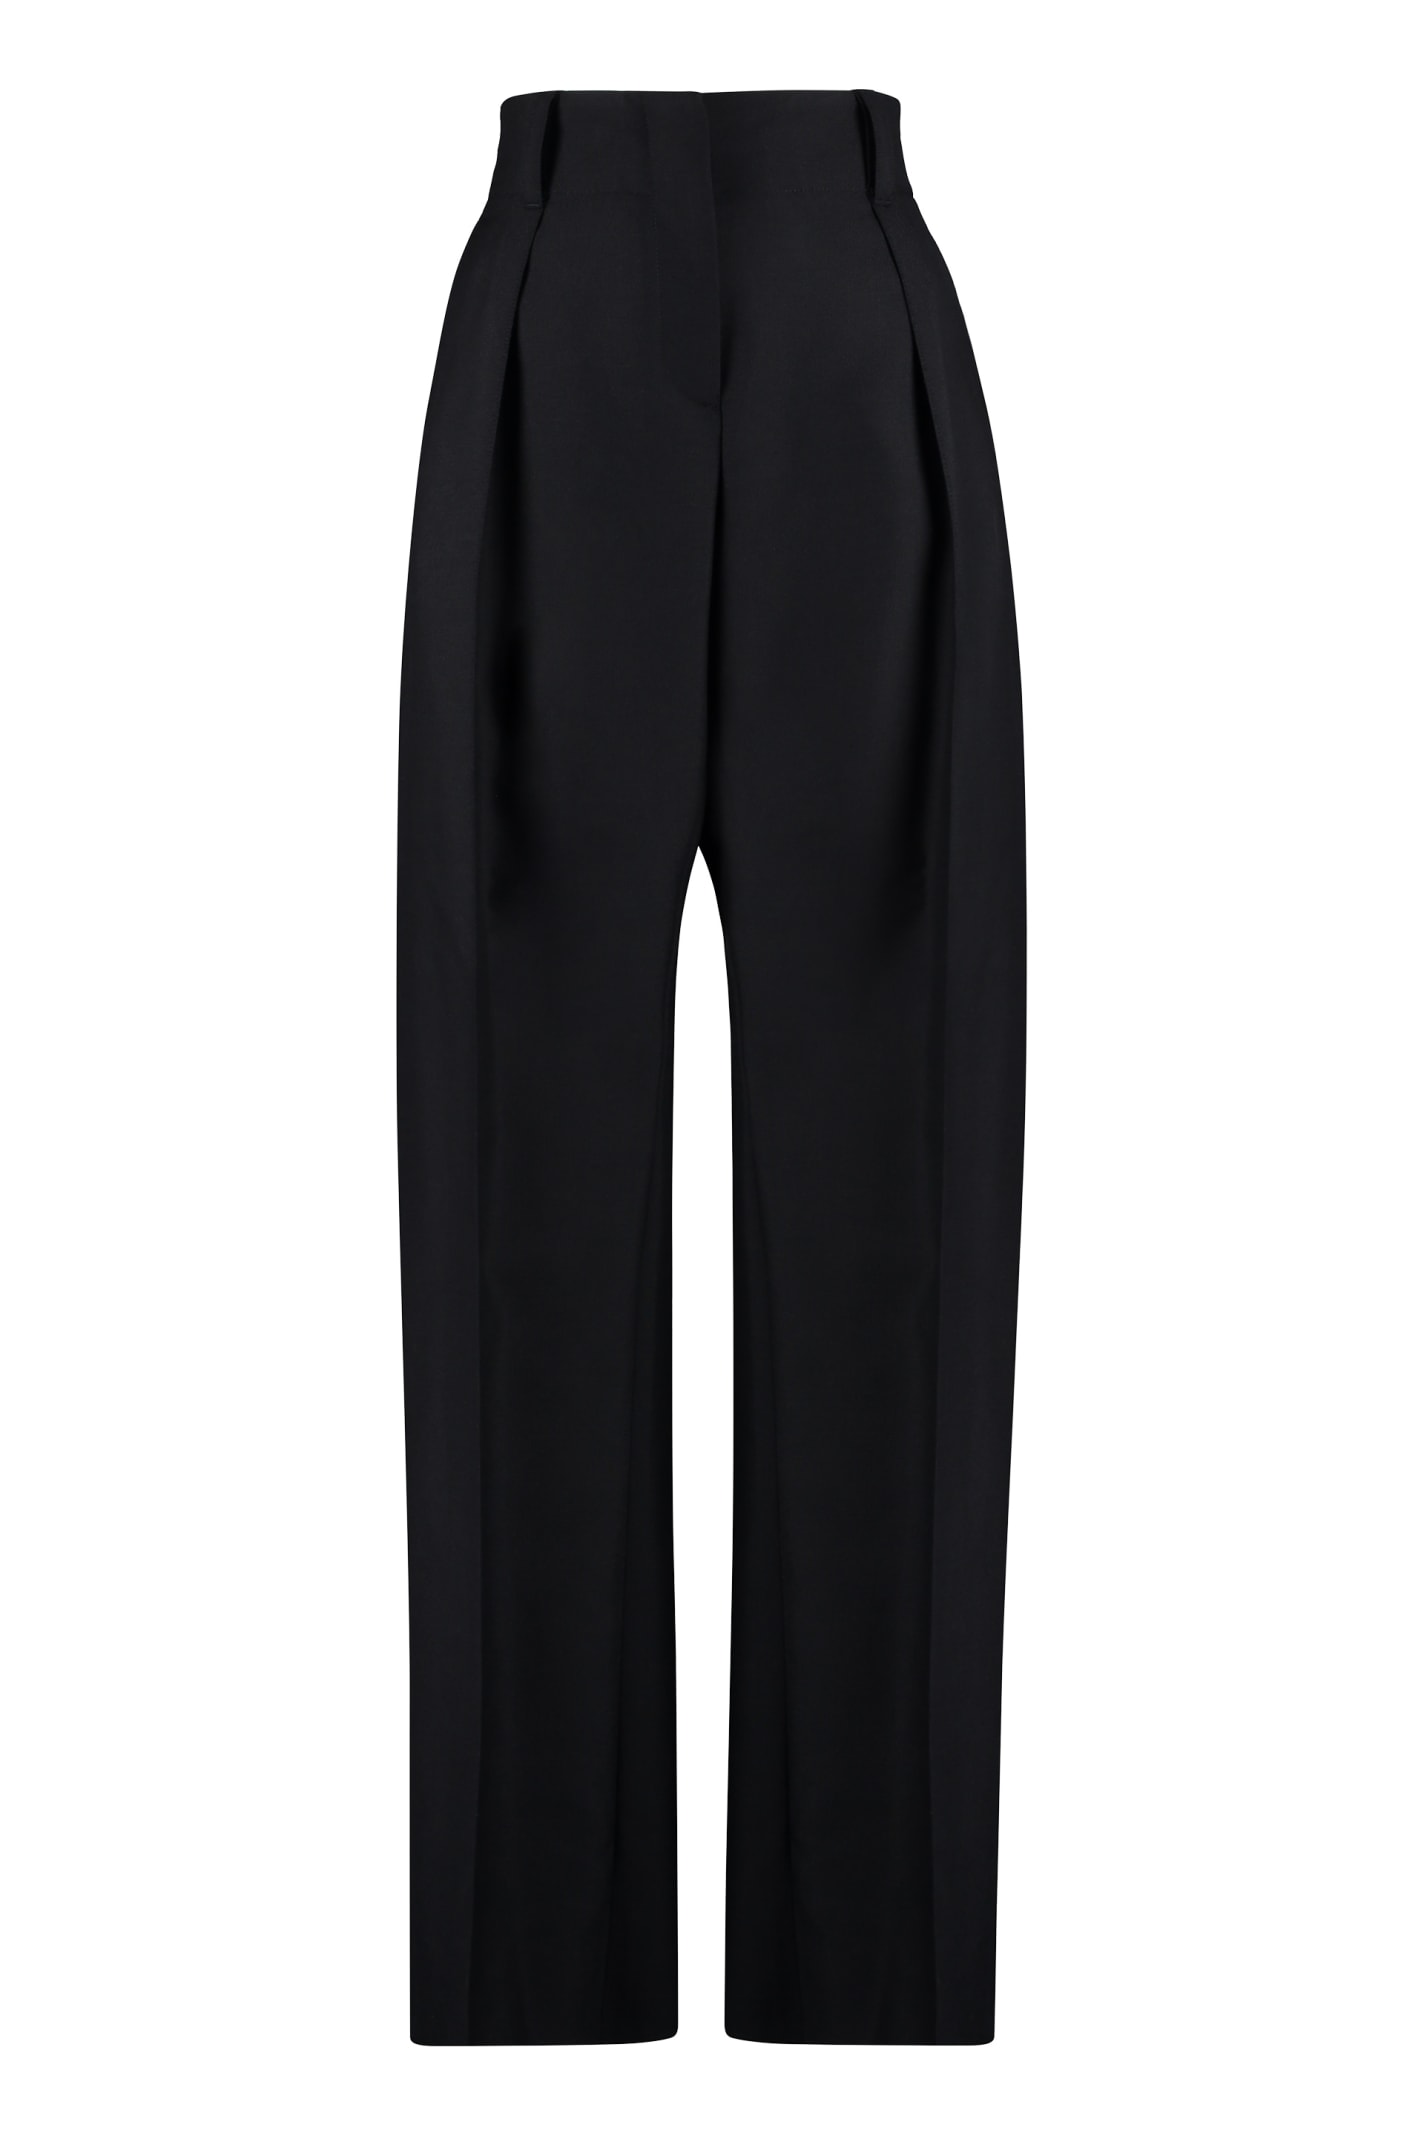 Salvatore Ferragamo Wool And Mohair Tailored Trousers